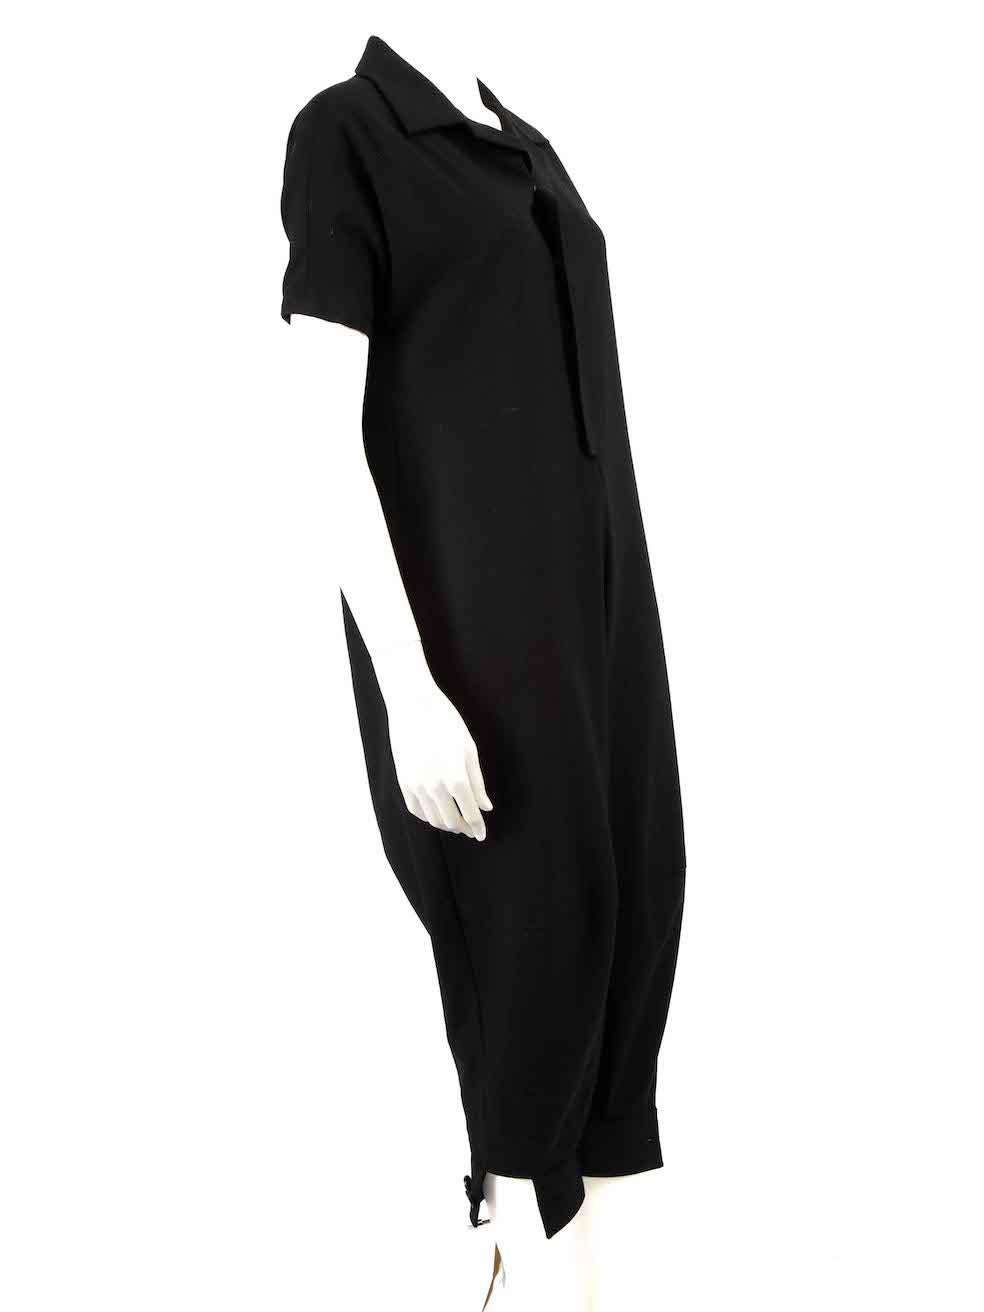 CONDITION is Very good. Minimal wear to jumpsuit is evident. Minimal wear to the rear lining with light marks on this used Yohji Yamamoto designer resale item.
 
 
 
 Details
 
 
 Black
 
 Wool
 
 Jumpsuit
 
 Snap button fastening
 
 V-neck
 
 Short